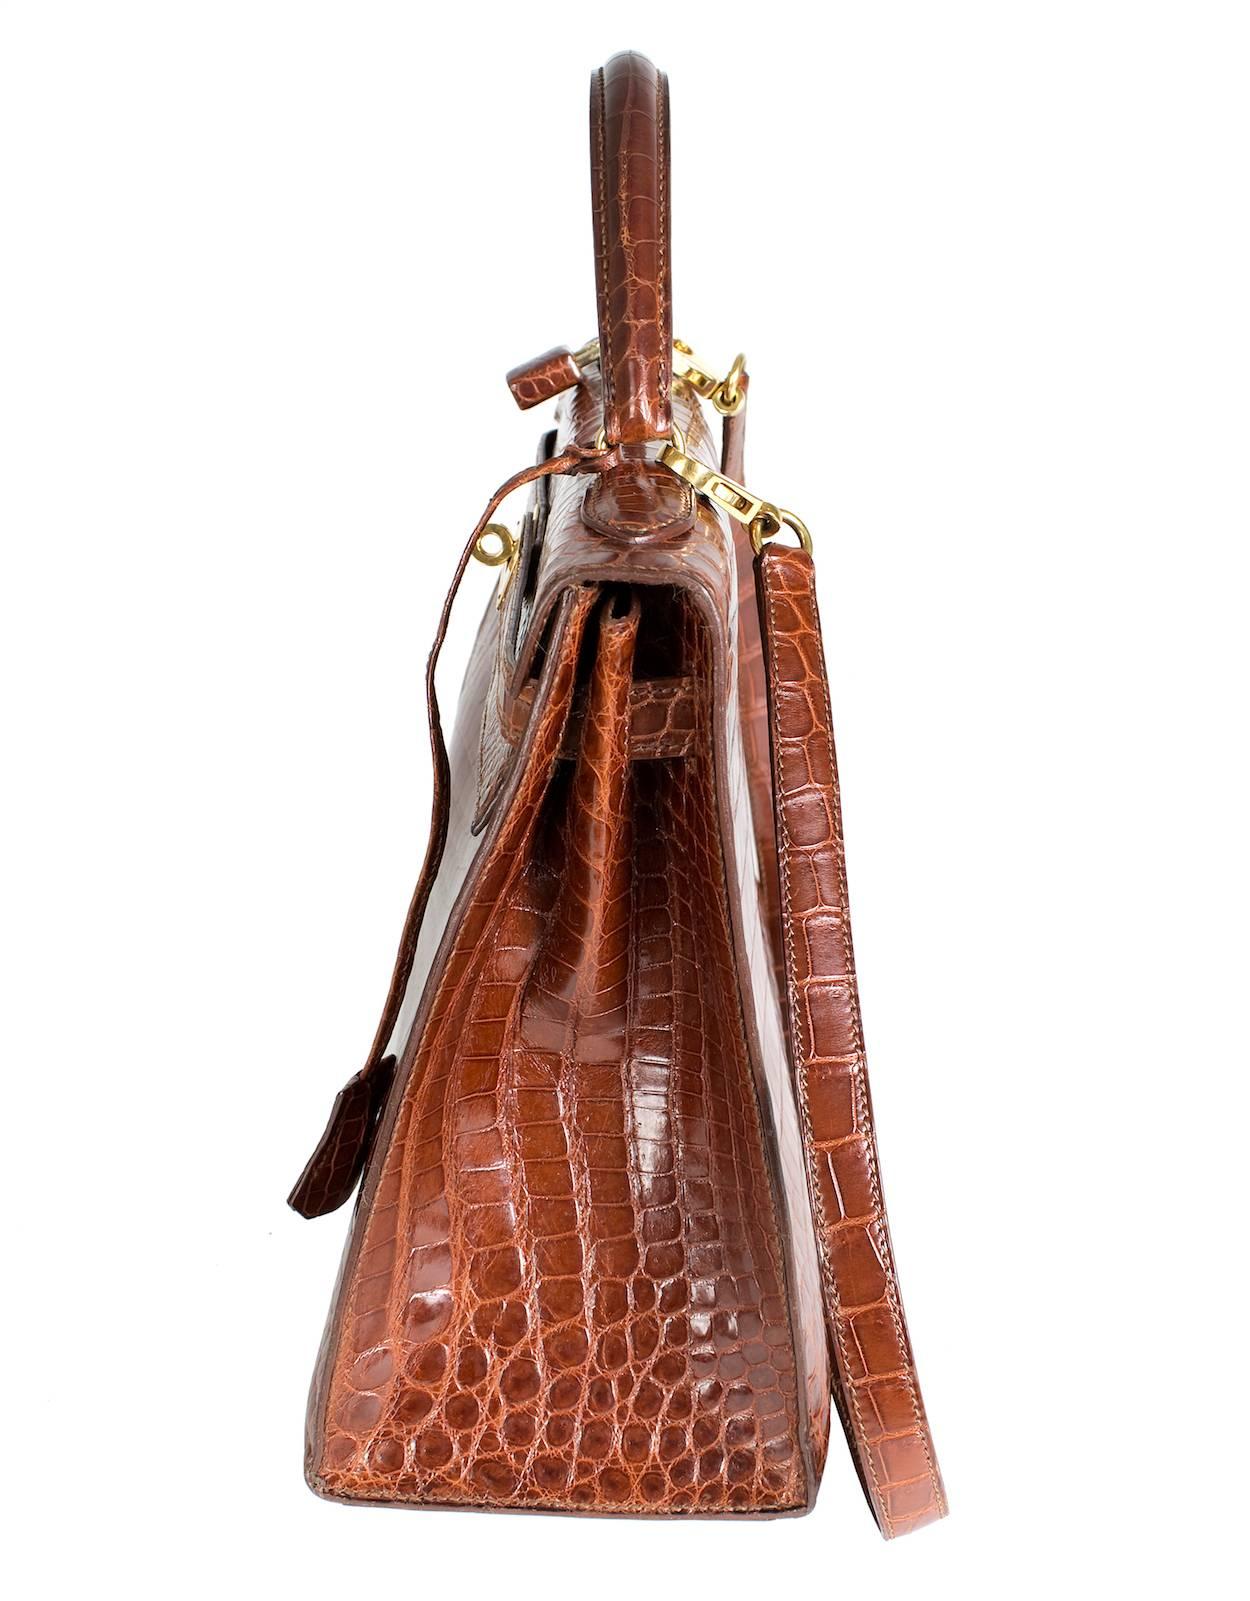 This is a cognac crocodile Kelly bag by Hermes from 1991.  Lock and key included. 

12.5" x 4.5" x 8.5"
3" handle drop
34" shoulder strap length